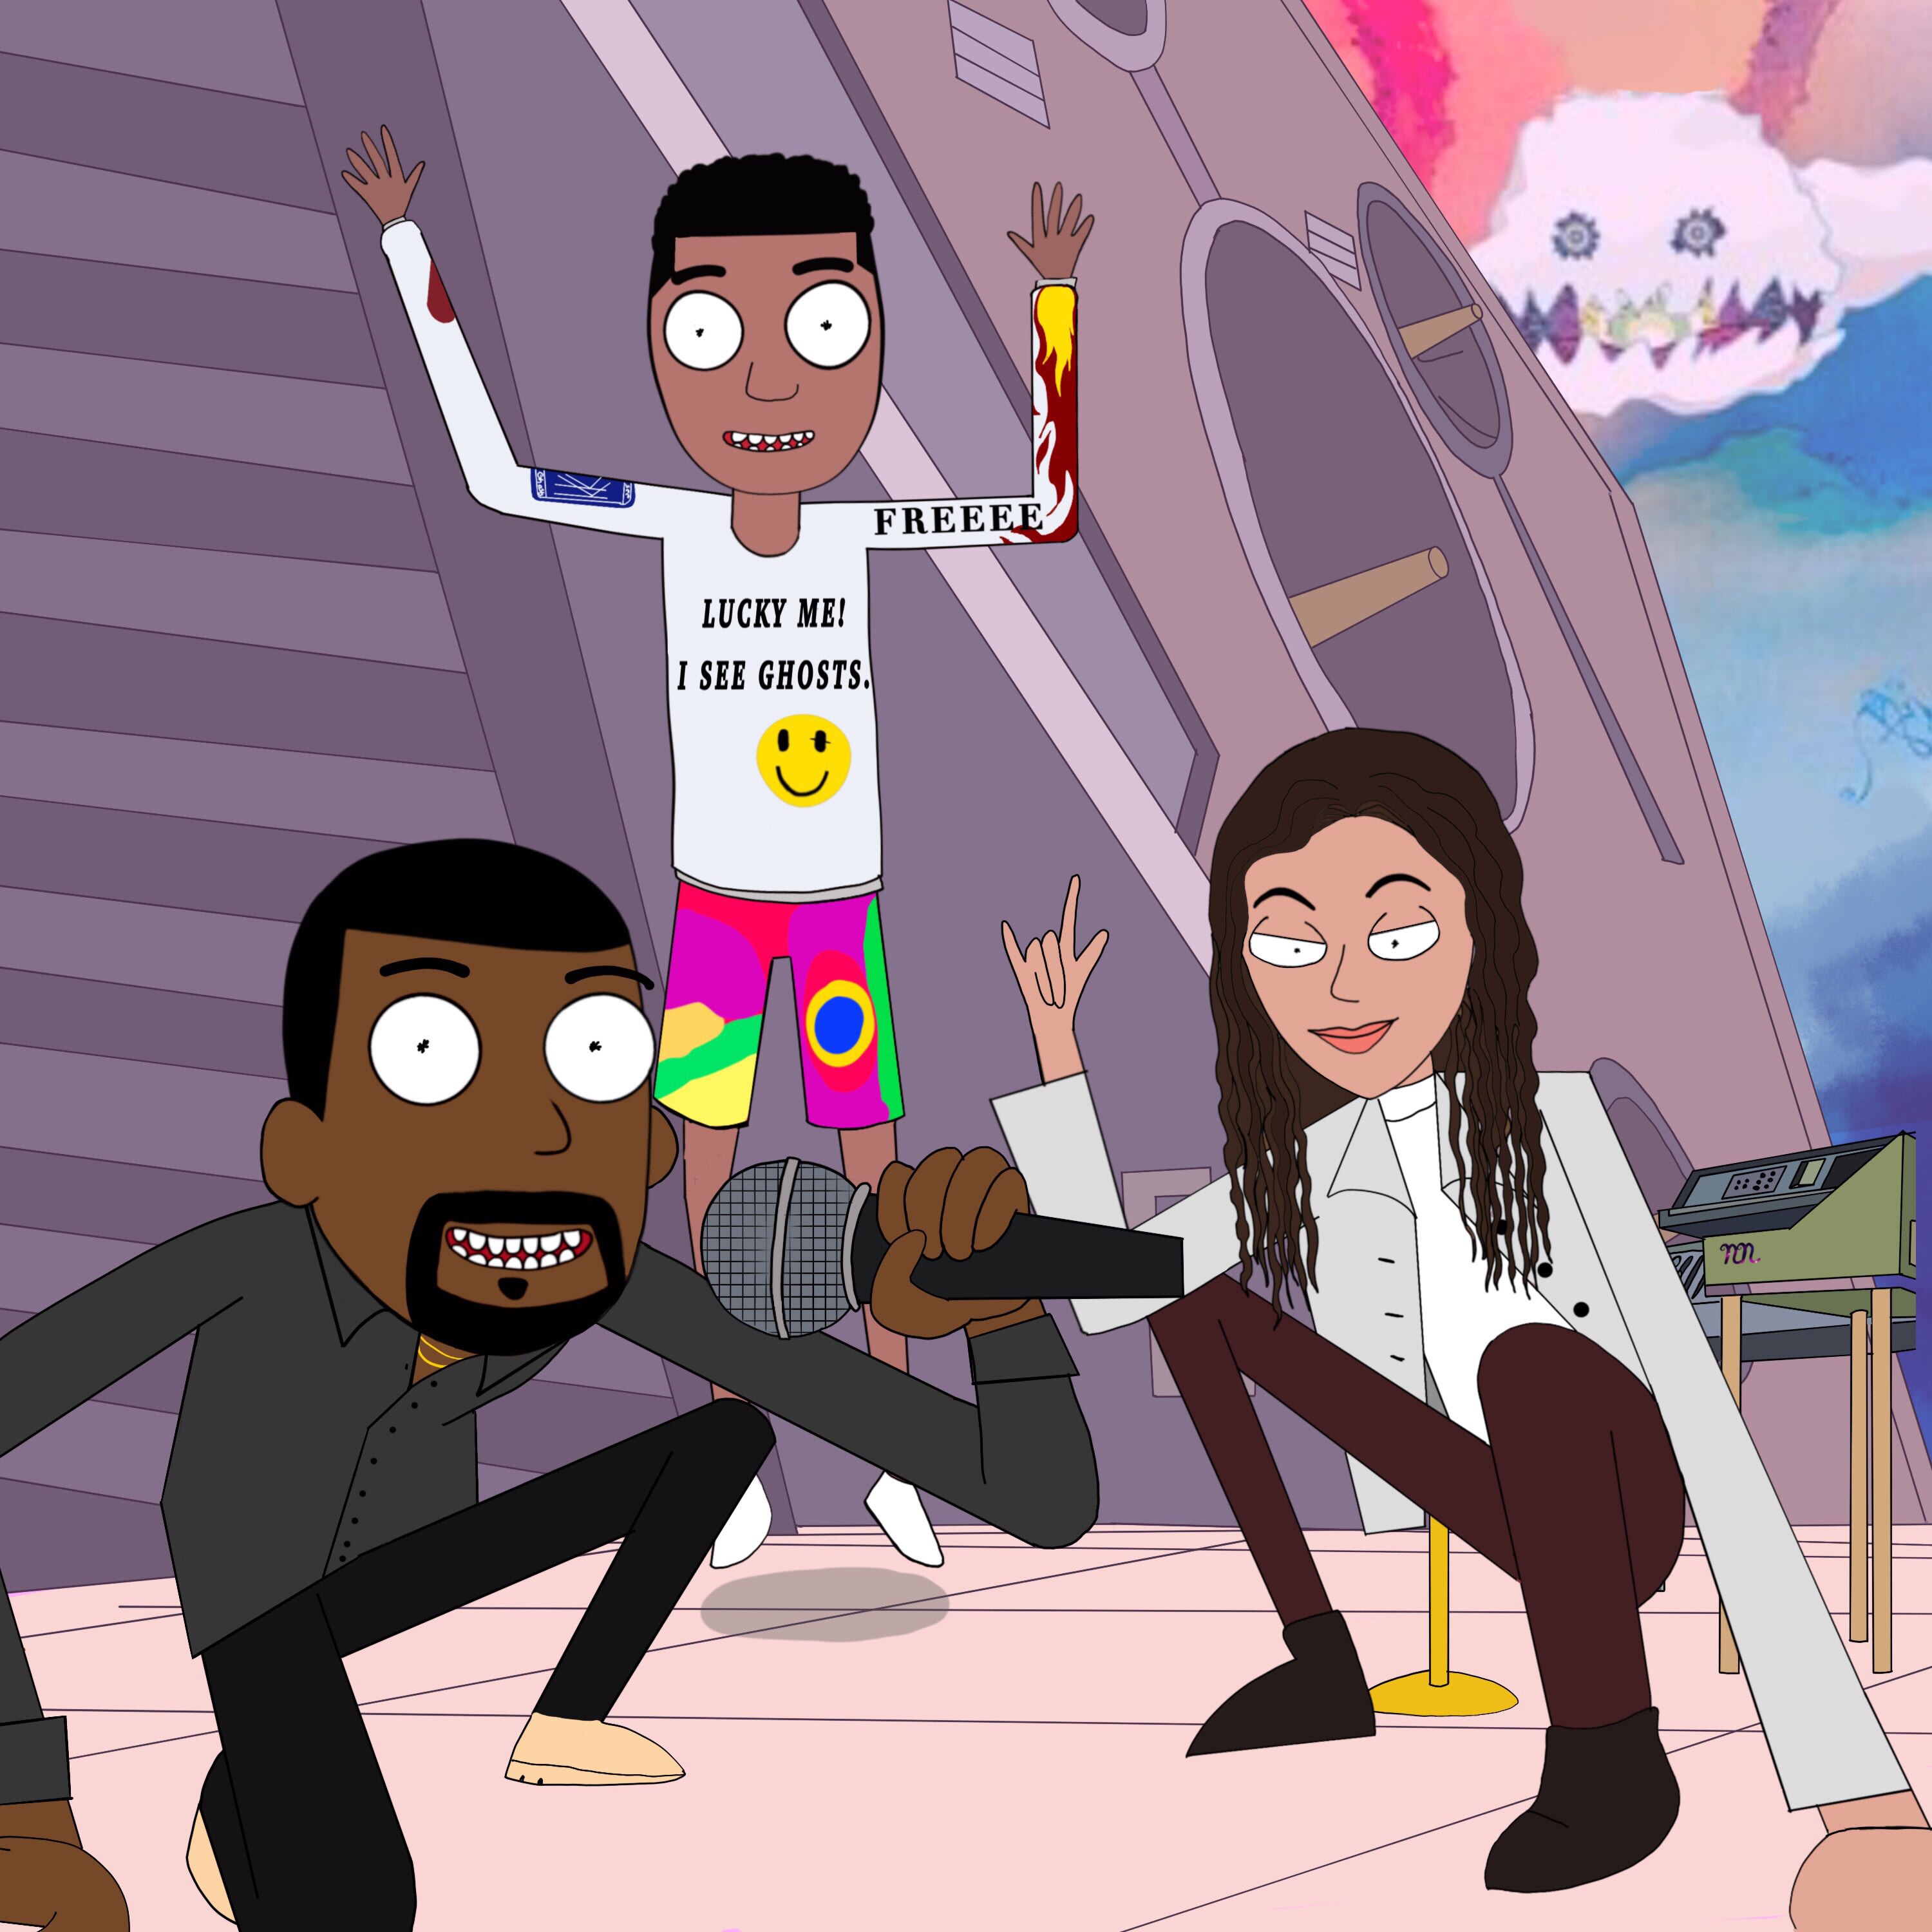 kanye-west-rick-and-morty-2